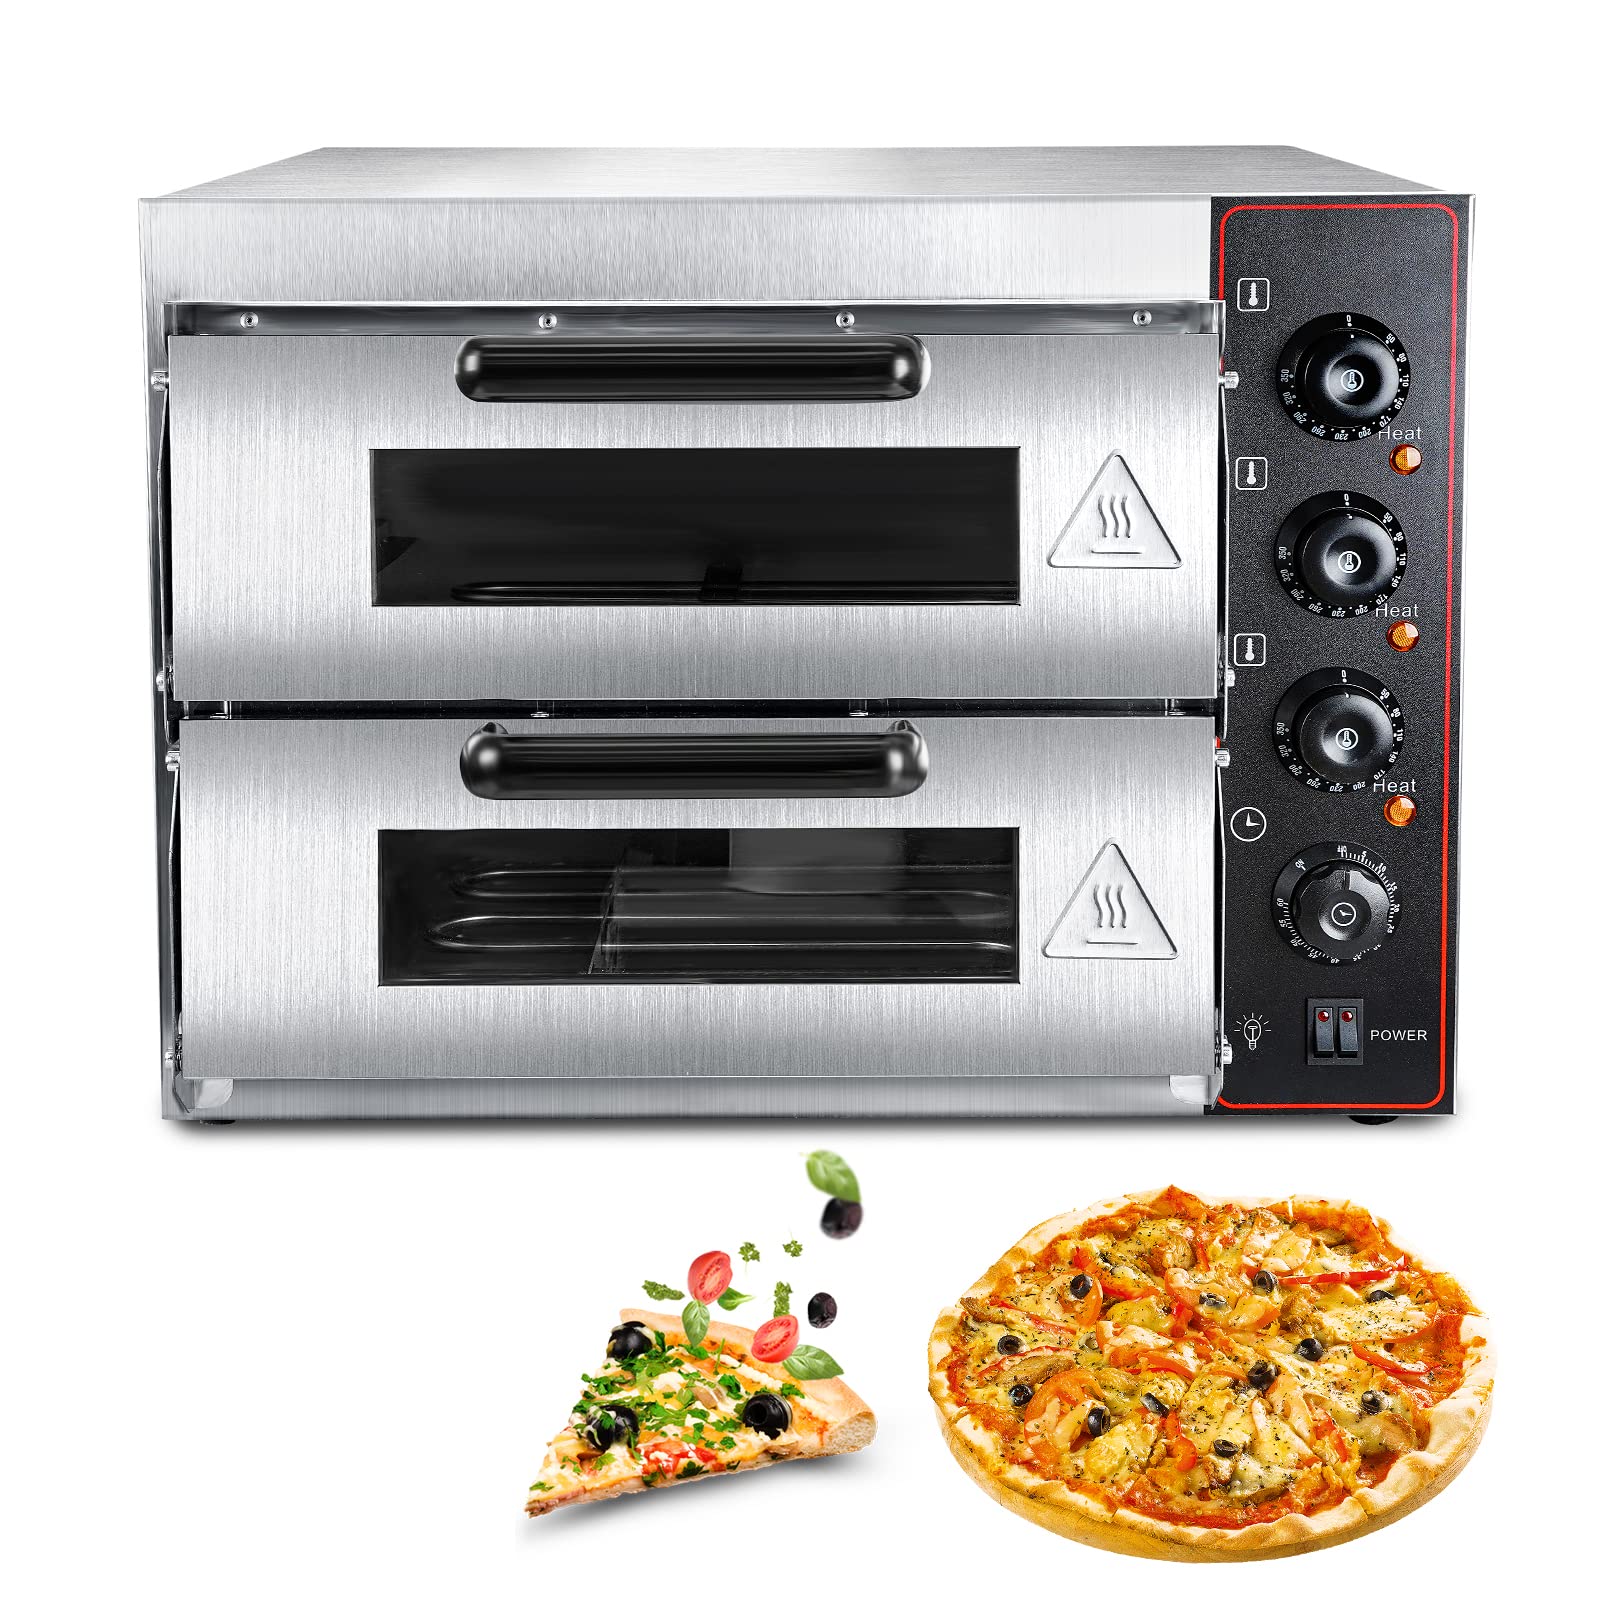 ZXMT commercial Pizza Oven Double Oven 3000W 16 inch Stainless Steel Pizza Electric countertop Pizza and Snack Oven Multipurpose